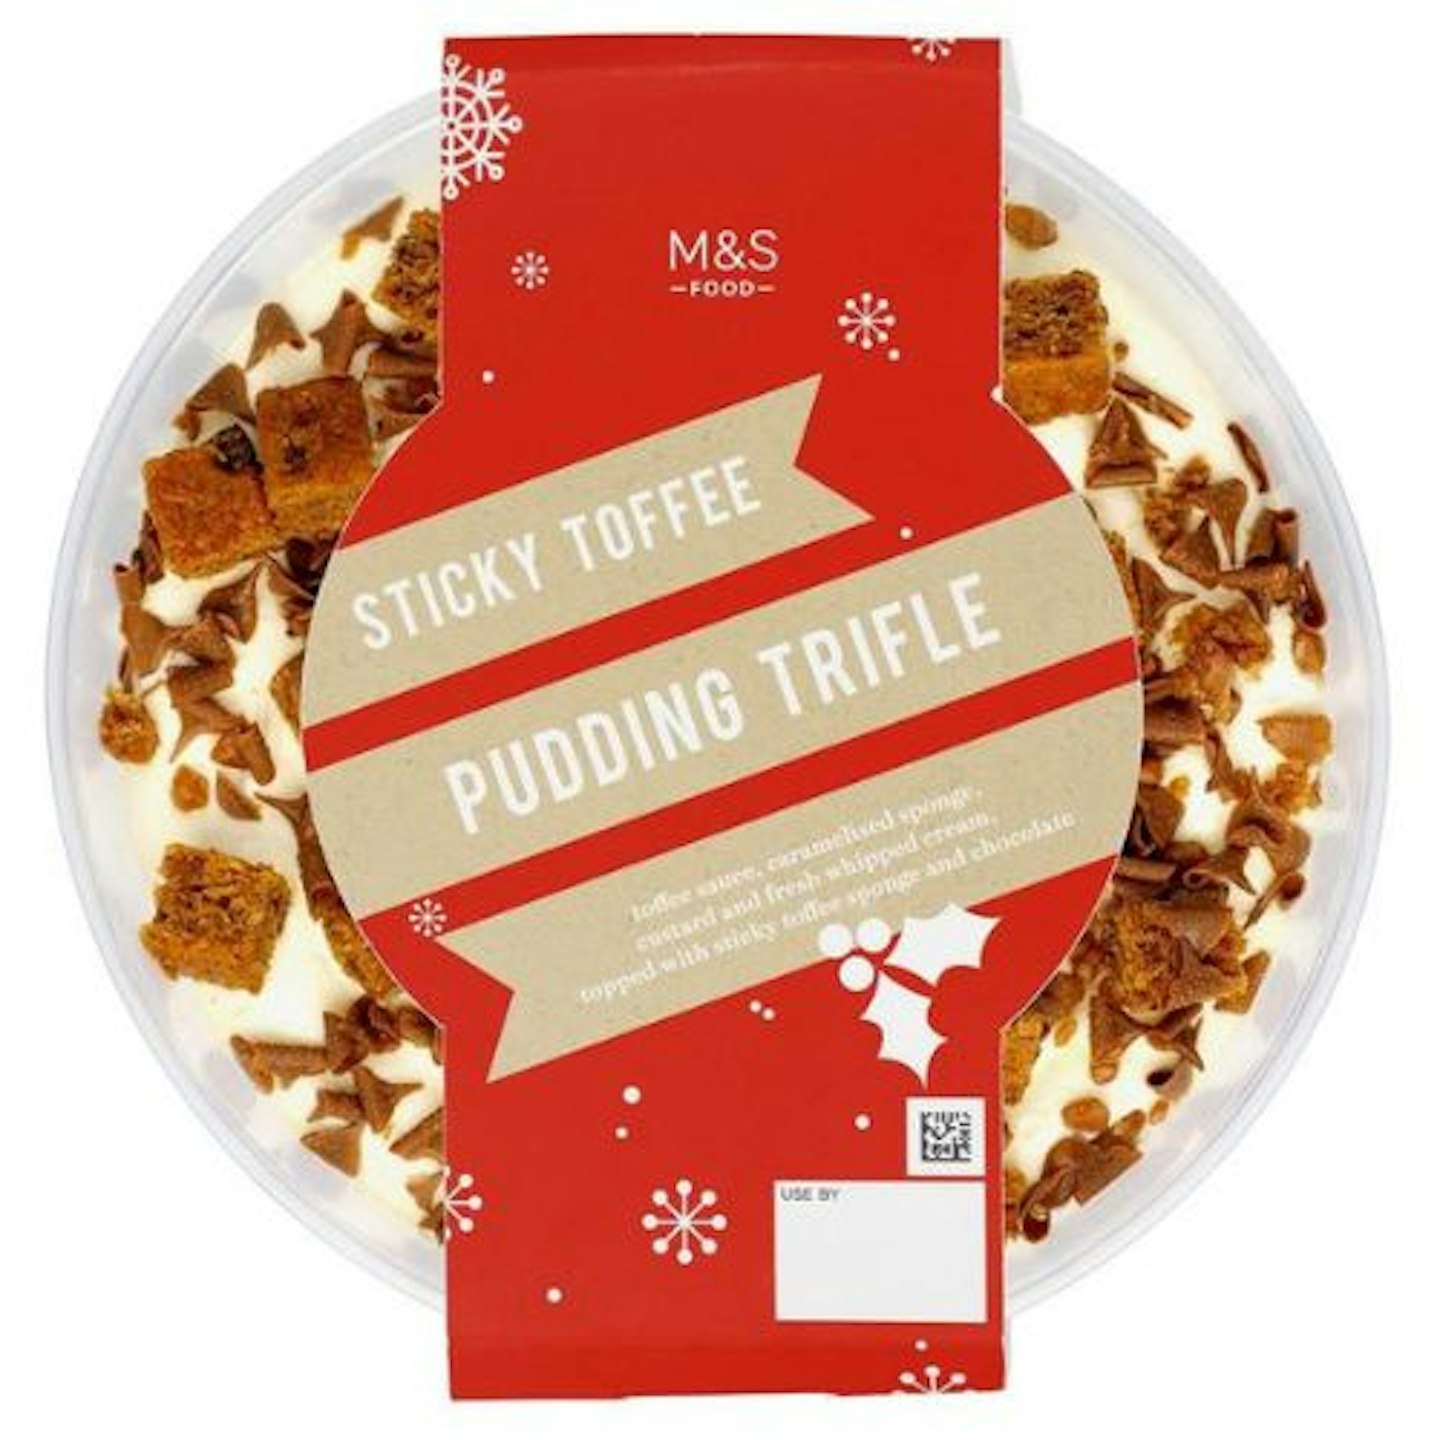 M&S Sticky Toffee Pudding Trifle